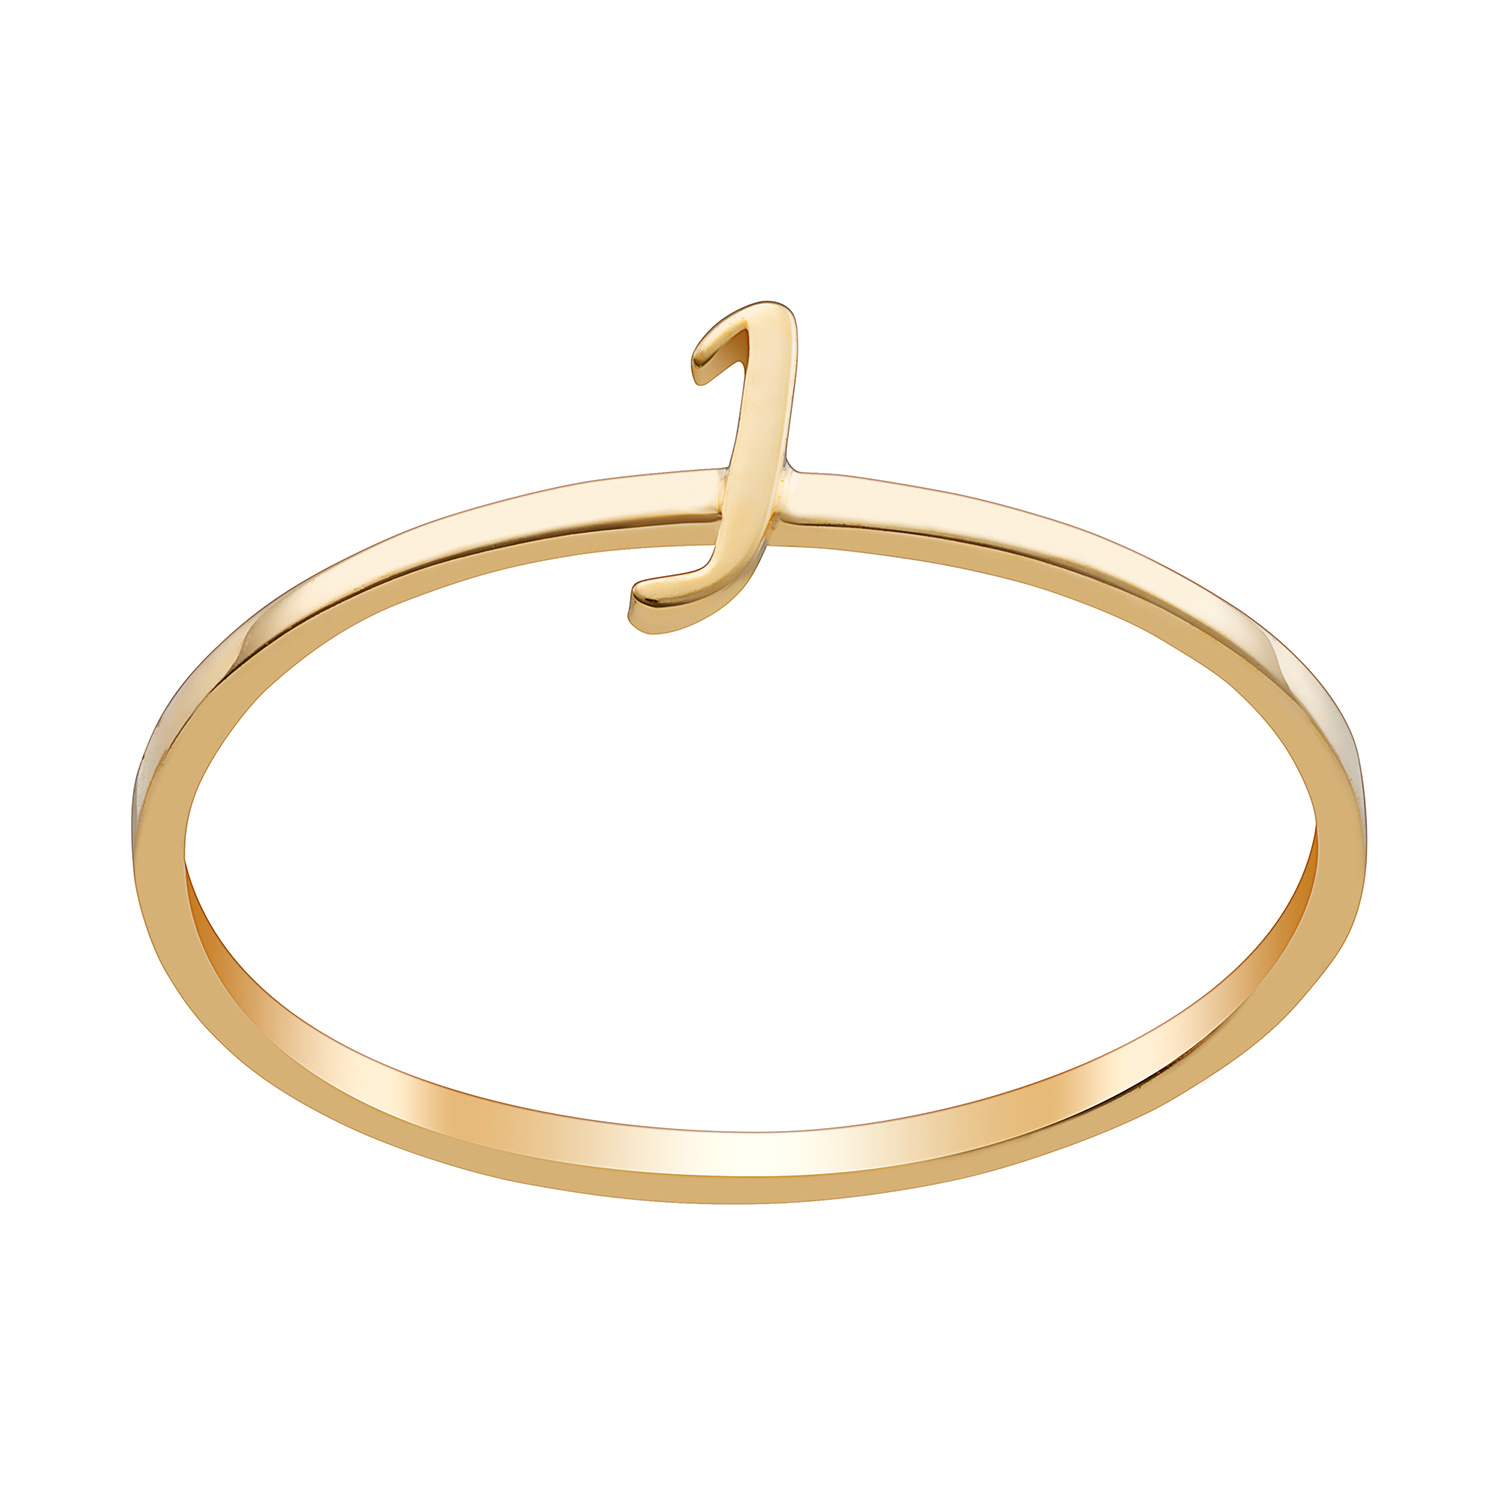 14K Gold over Sterling Petite Lowercase Script Initial Ring